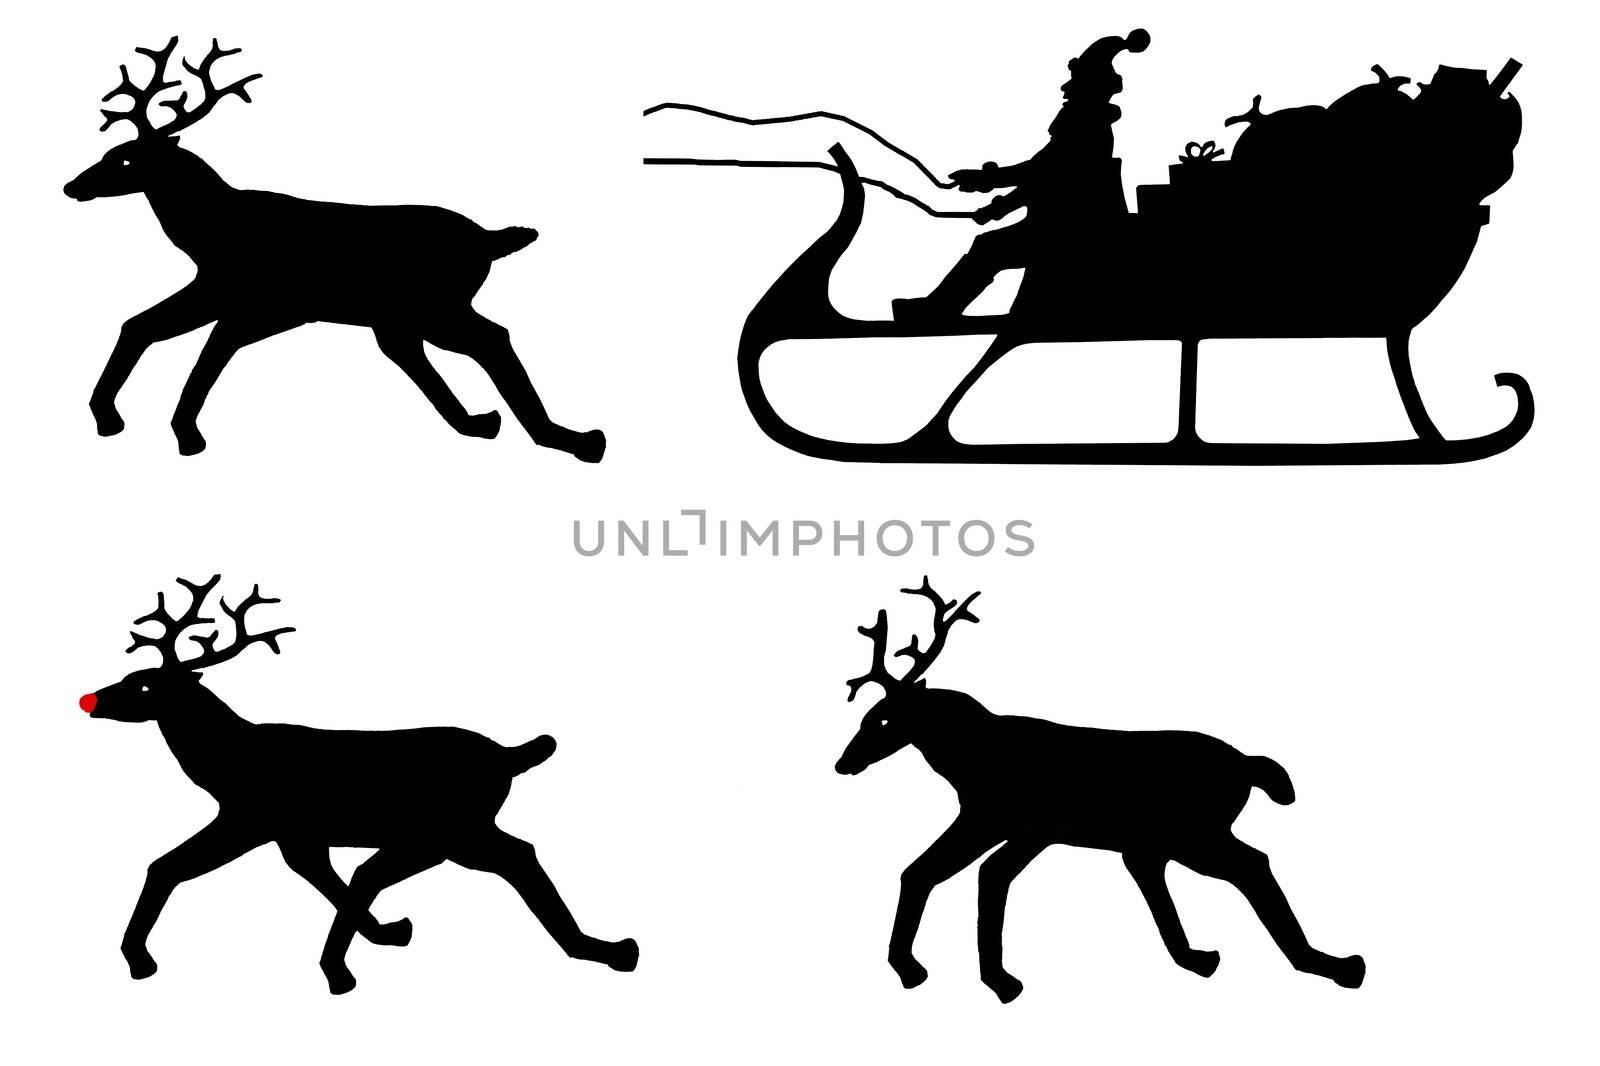 Illustration of Santa's sleigh with reindeer isolated on a white background